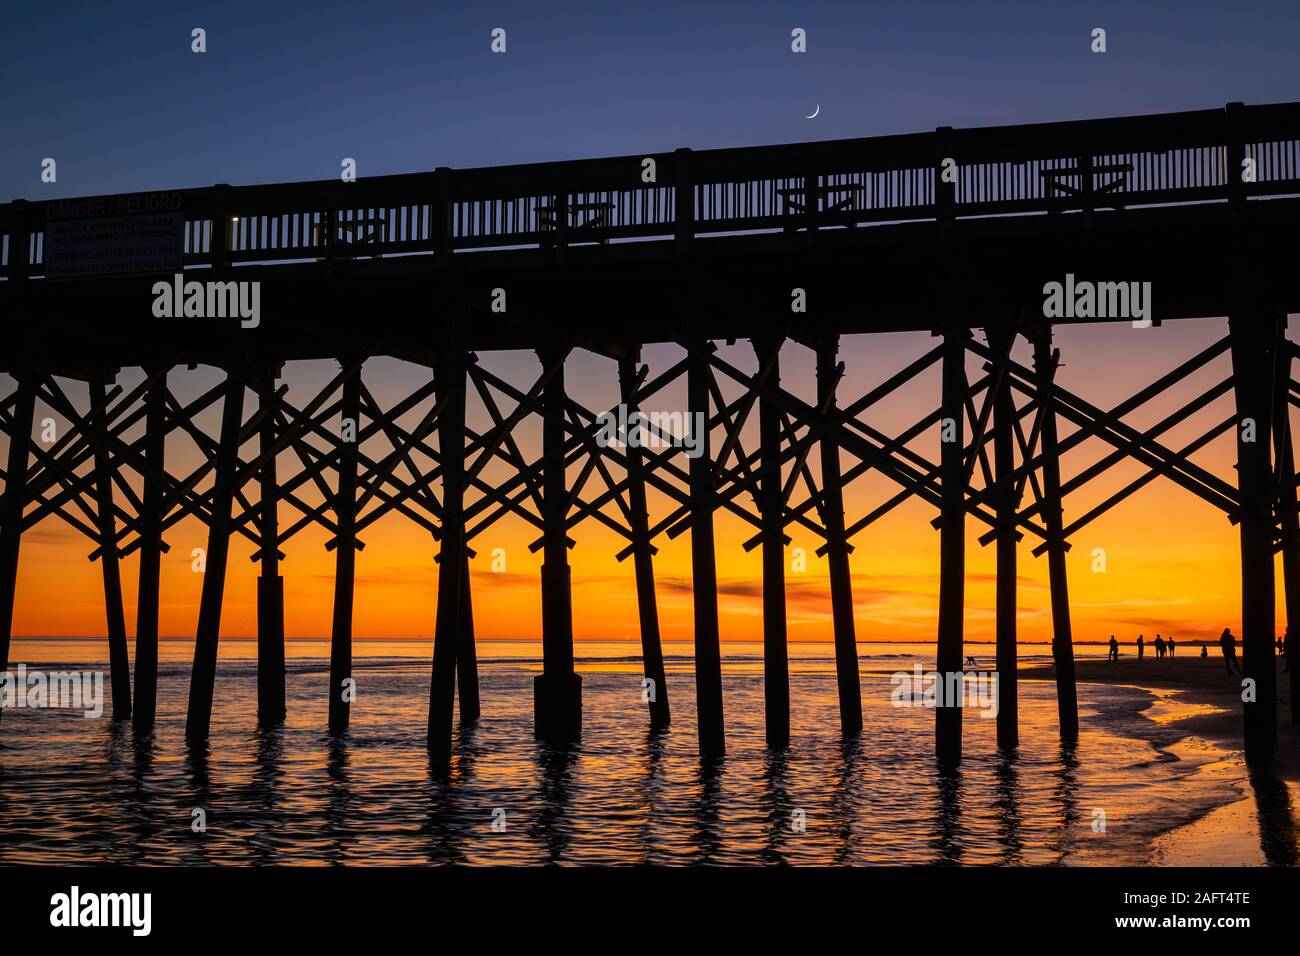 Folly Beach near Charleston, the oldest and largest city in the U.S. state of South Carolina, known for its large role in the American slave trade. Stock Photo